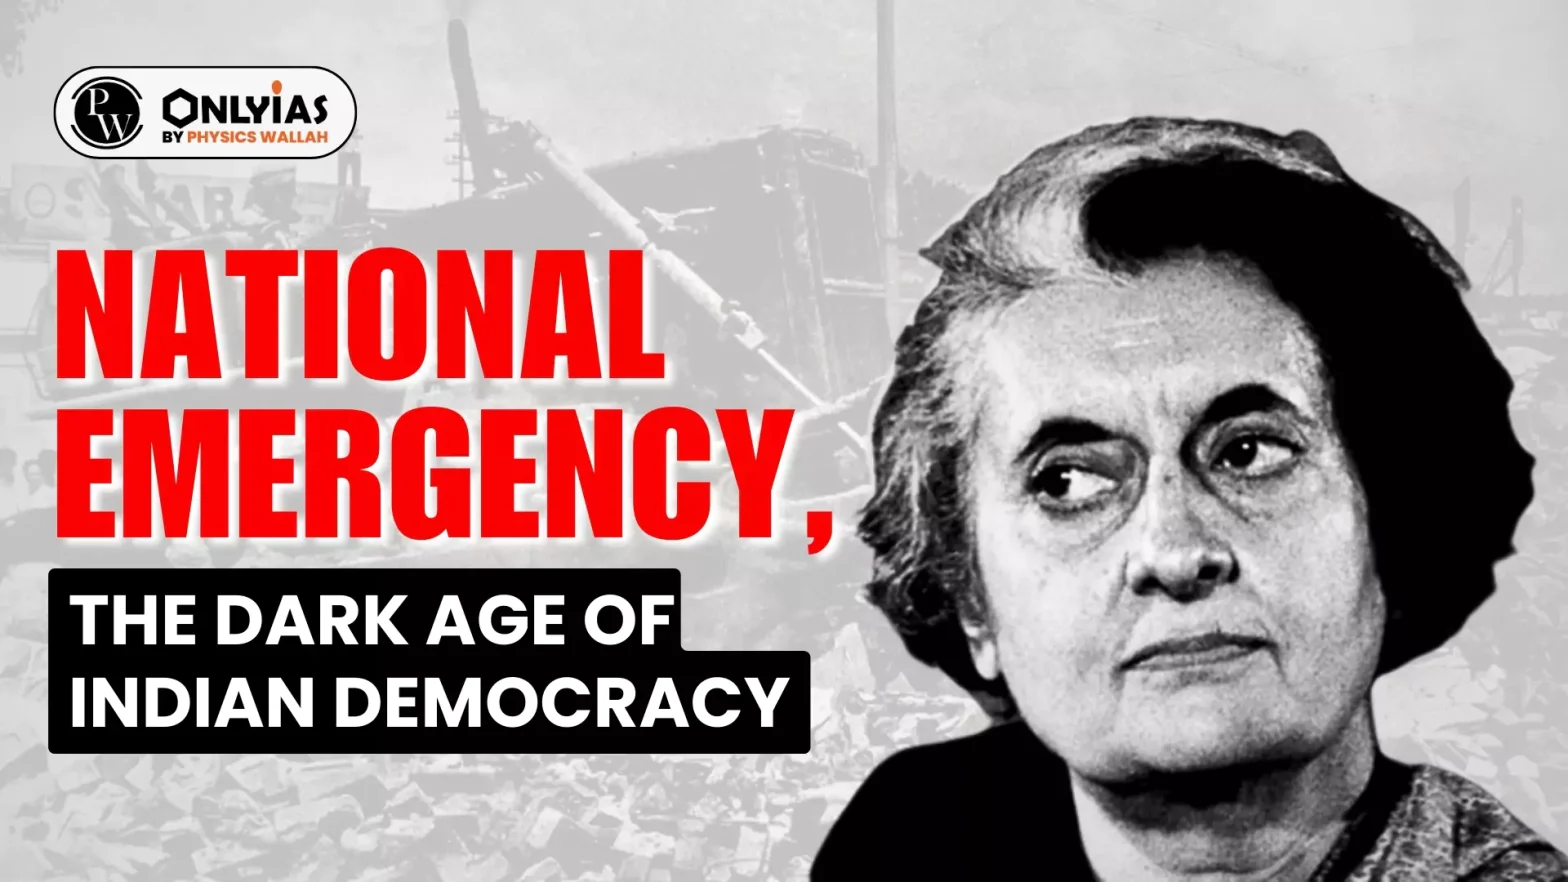 National Emergency, The Dark Age of Indian Democracy